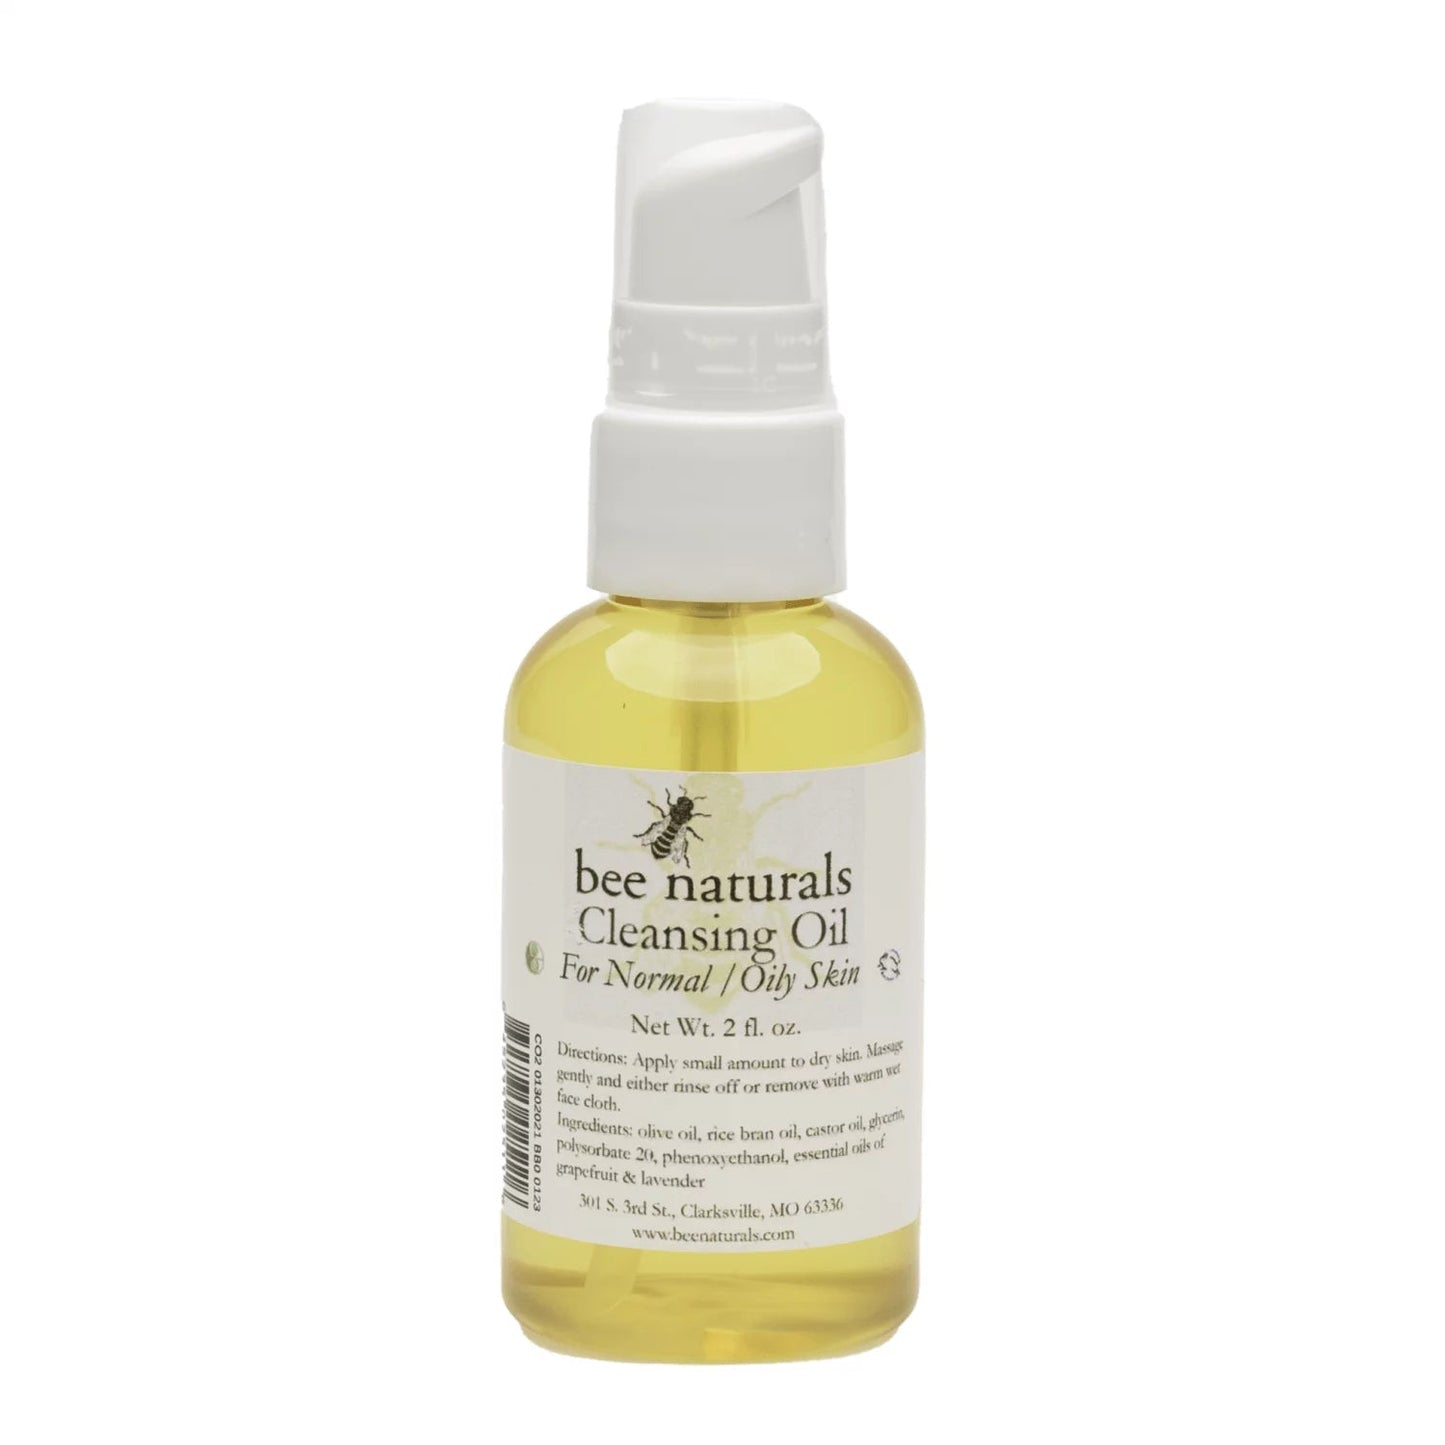 Cleansing Oil Makeup Remover